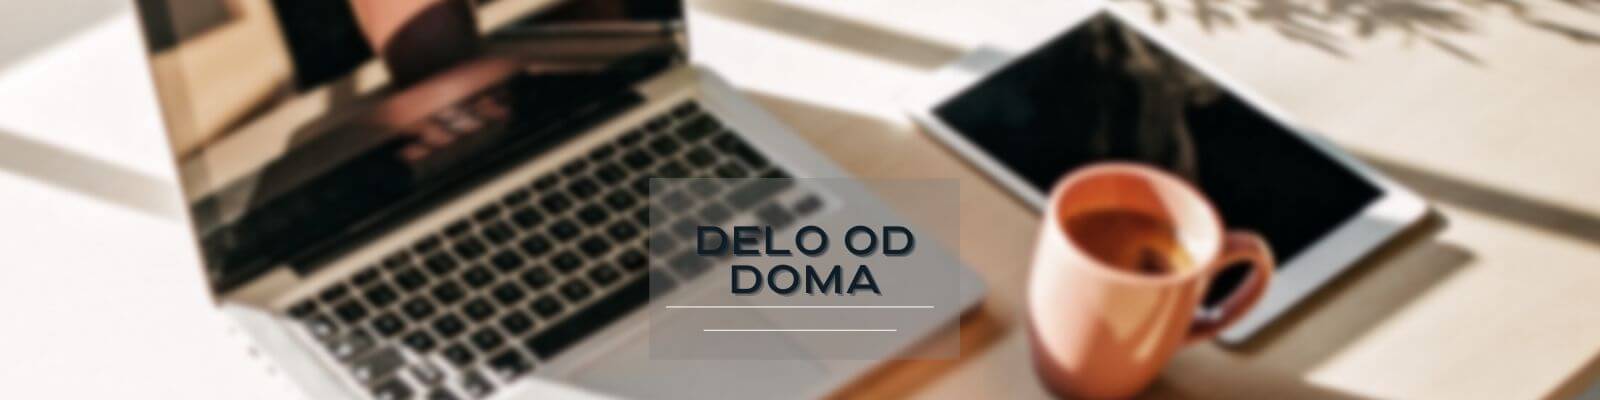 deo-od-doma